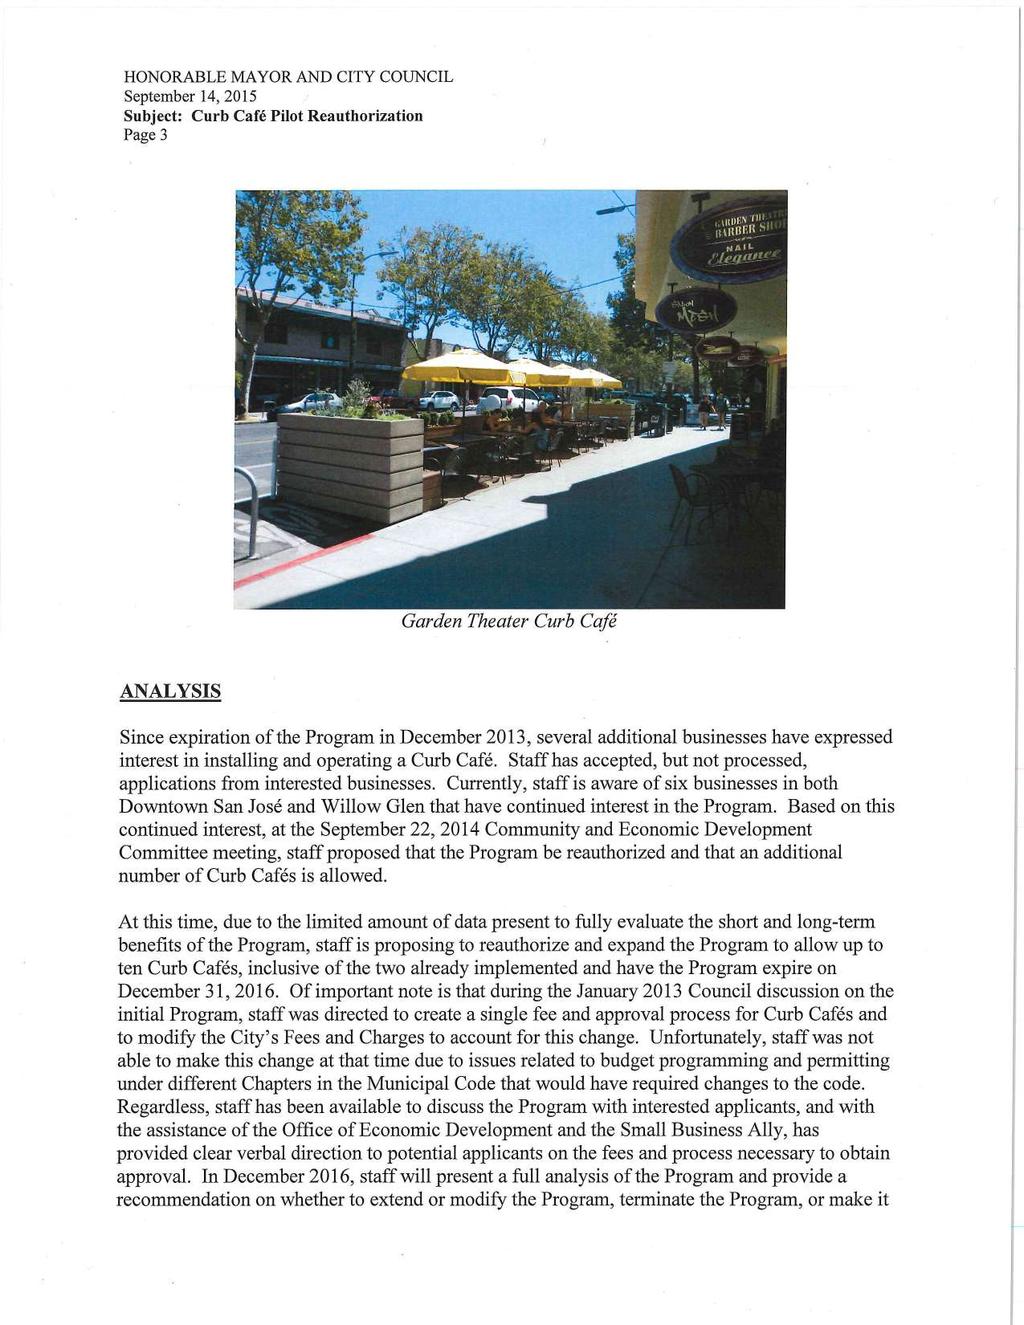 HONORABLE MAYOR AND CITY COUNCIL September 14, 2015 Subject: Curb Cafe Pilot Reauthorization Page 3 Garden Theater Curb Cafe ANALYSIS Since expiration of the Program in December 2013, several